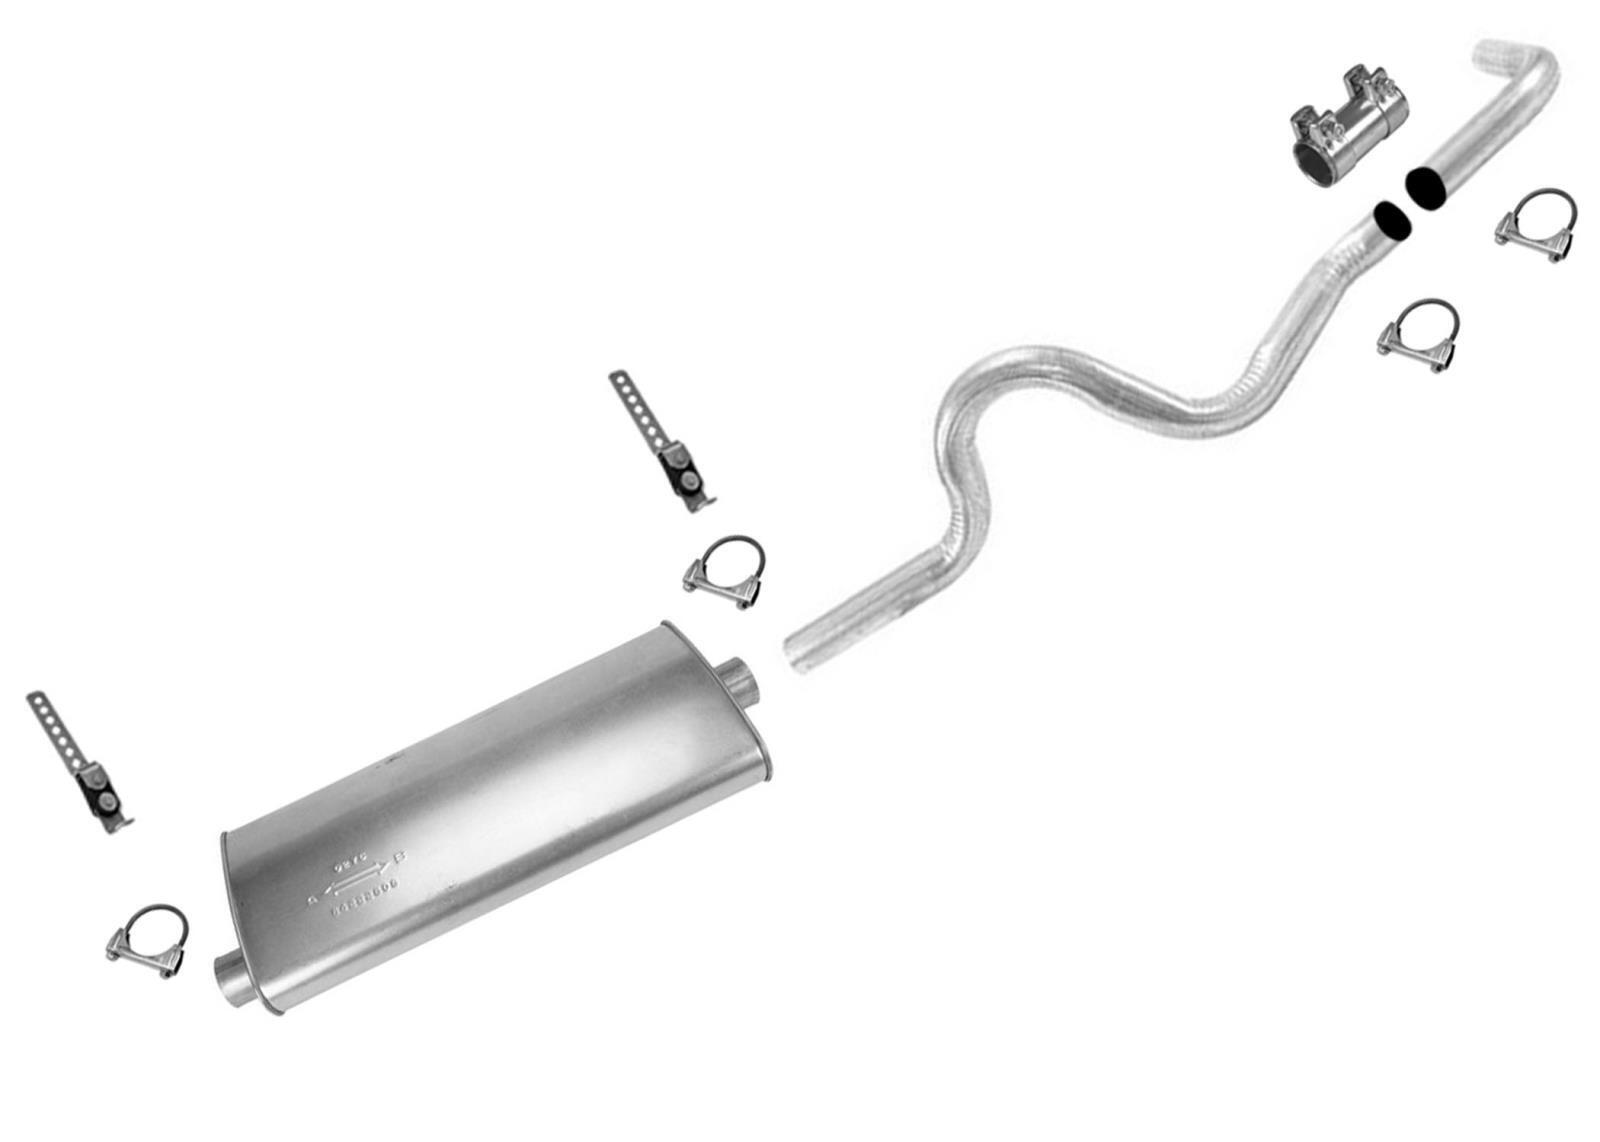 Muffler Tail Pipe Exhaust System for Jeep Grand Wagoneer 1984-1991 5.9L